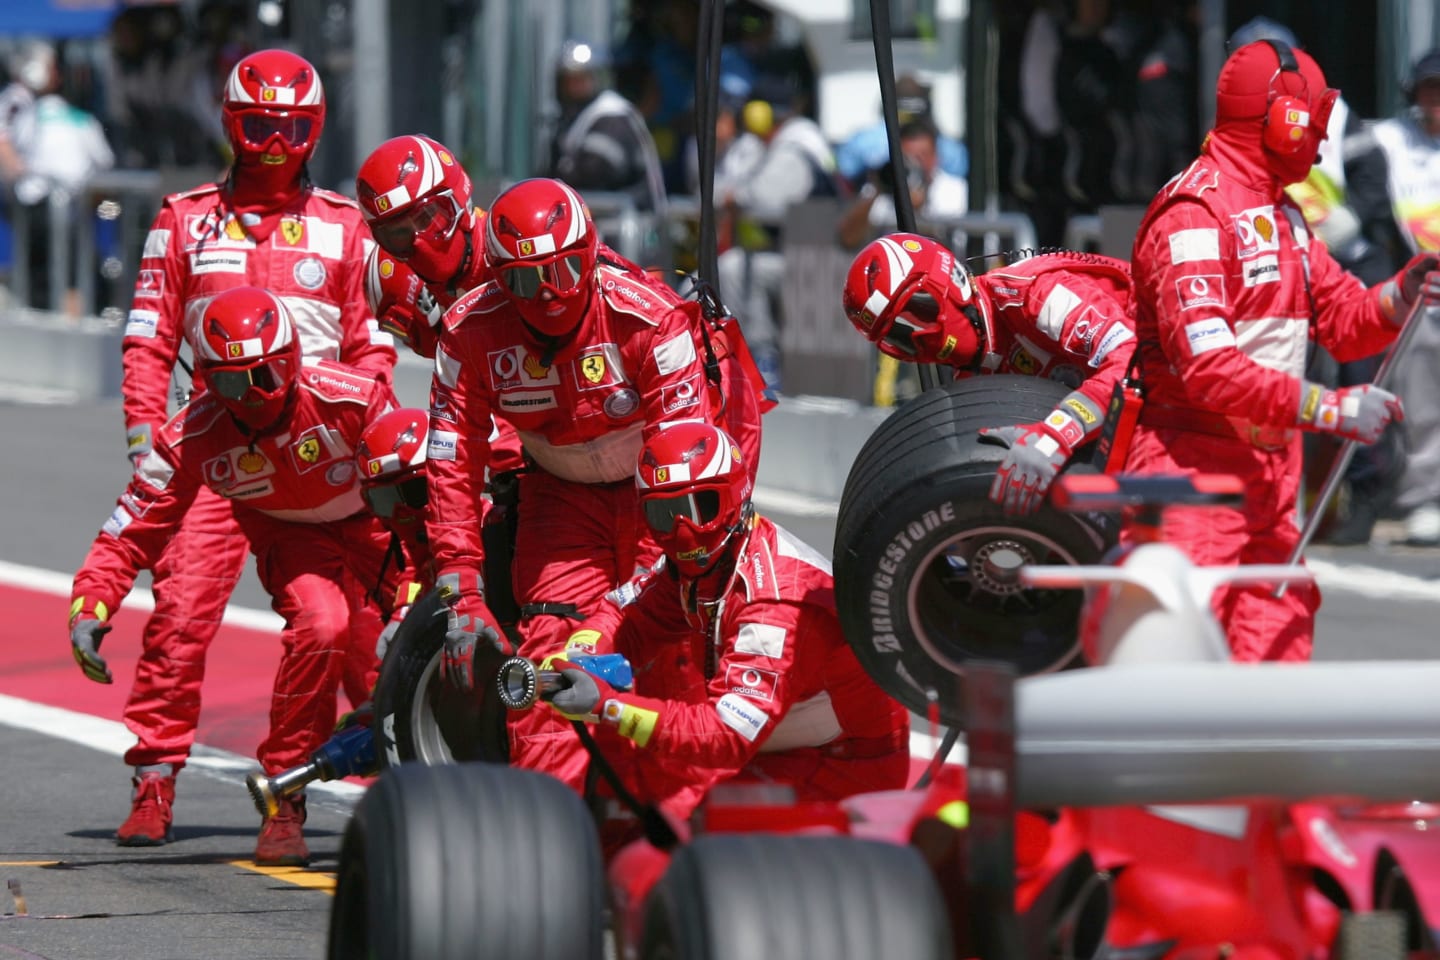 MAGNY-COURS, FRANCE - JULY 4: Michael Schumacher of Germany and Ferrari makes his final pit-stop